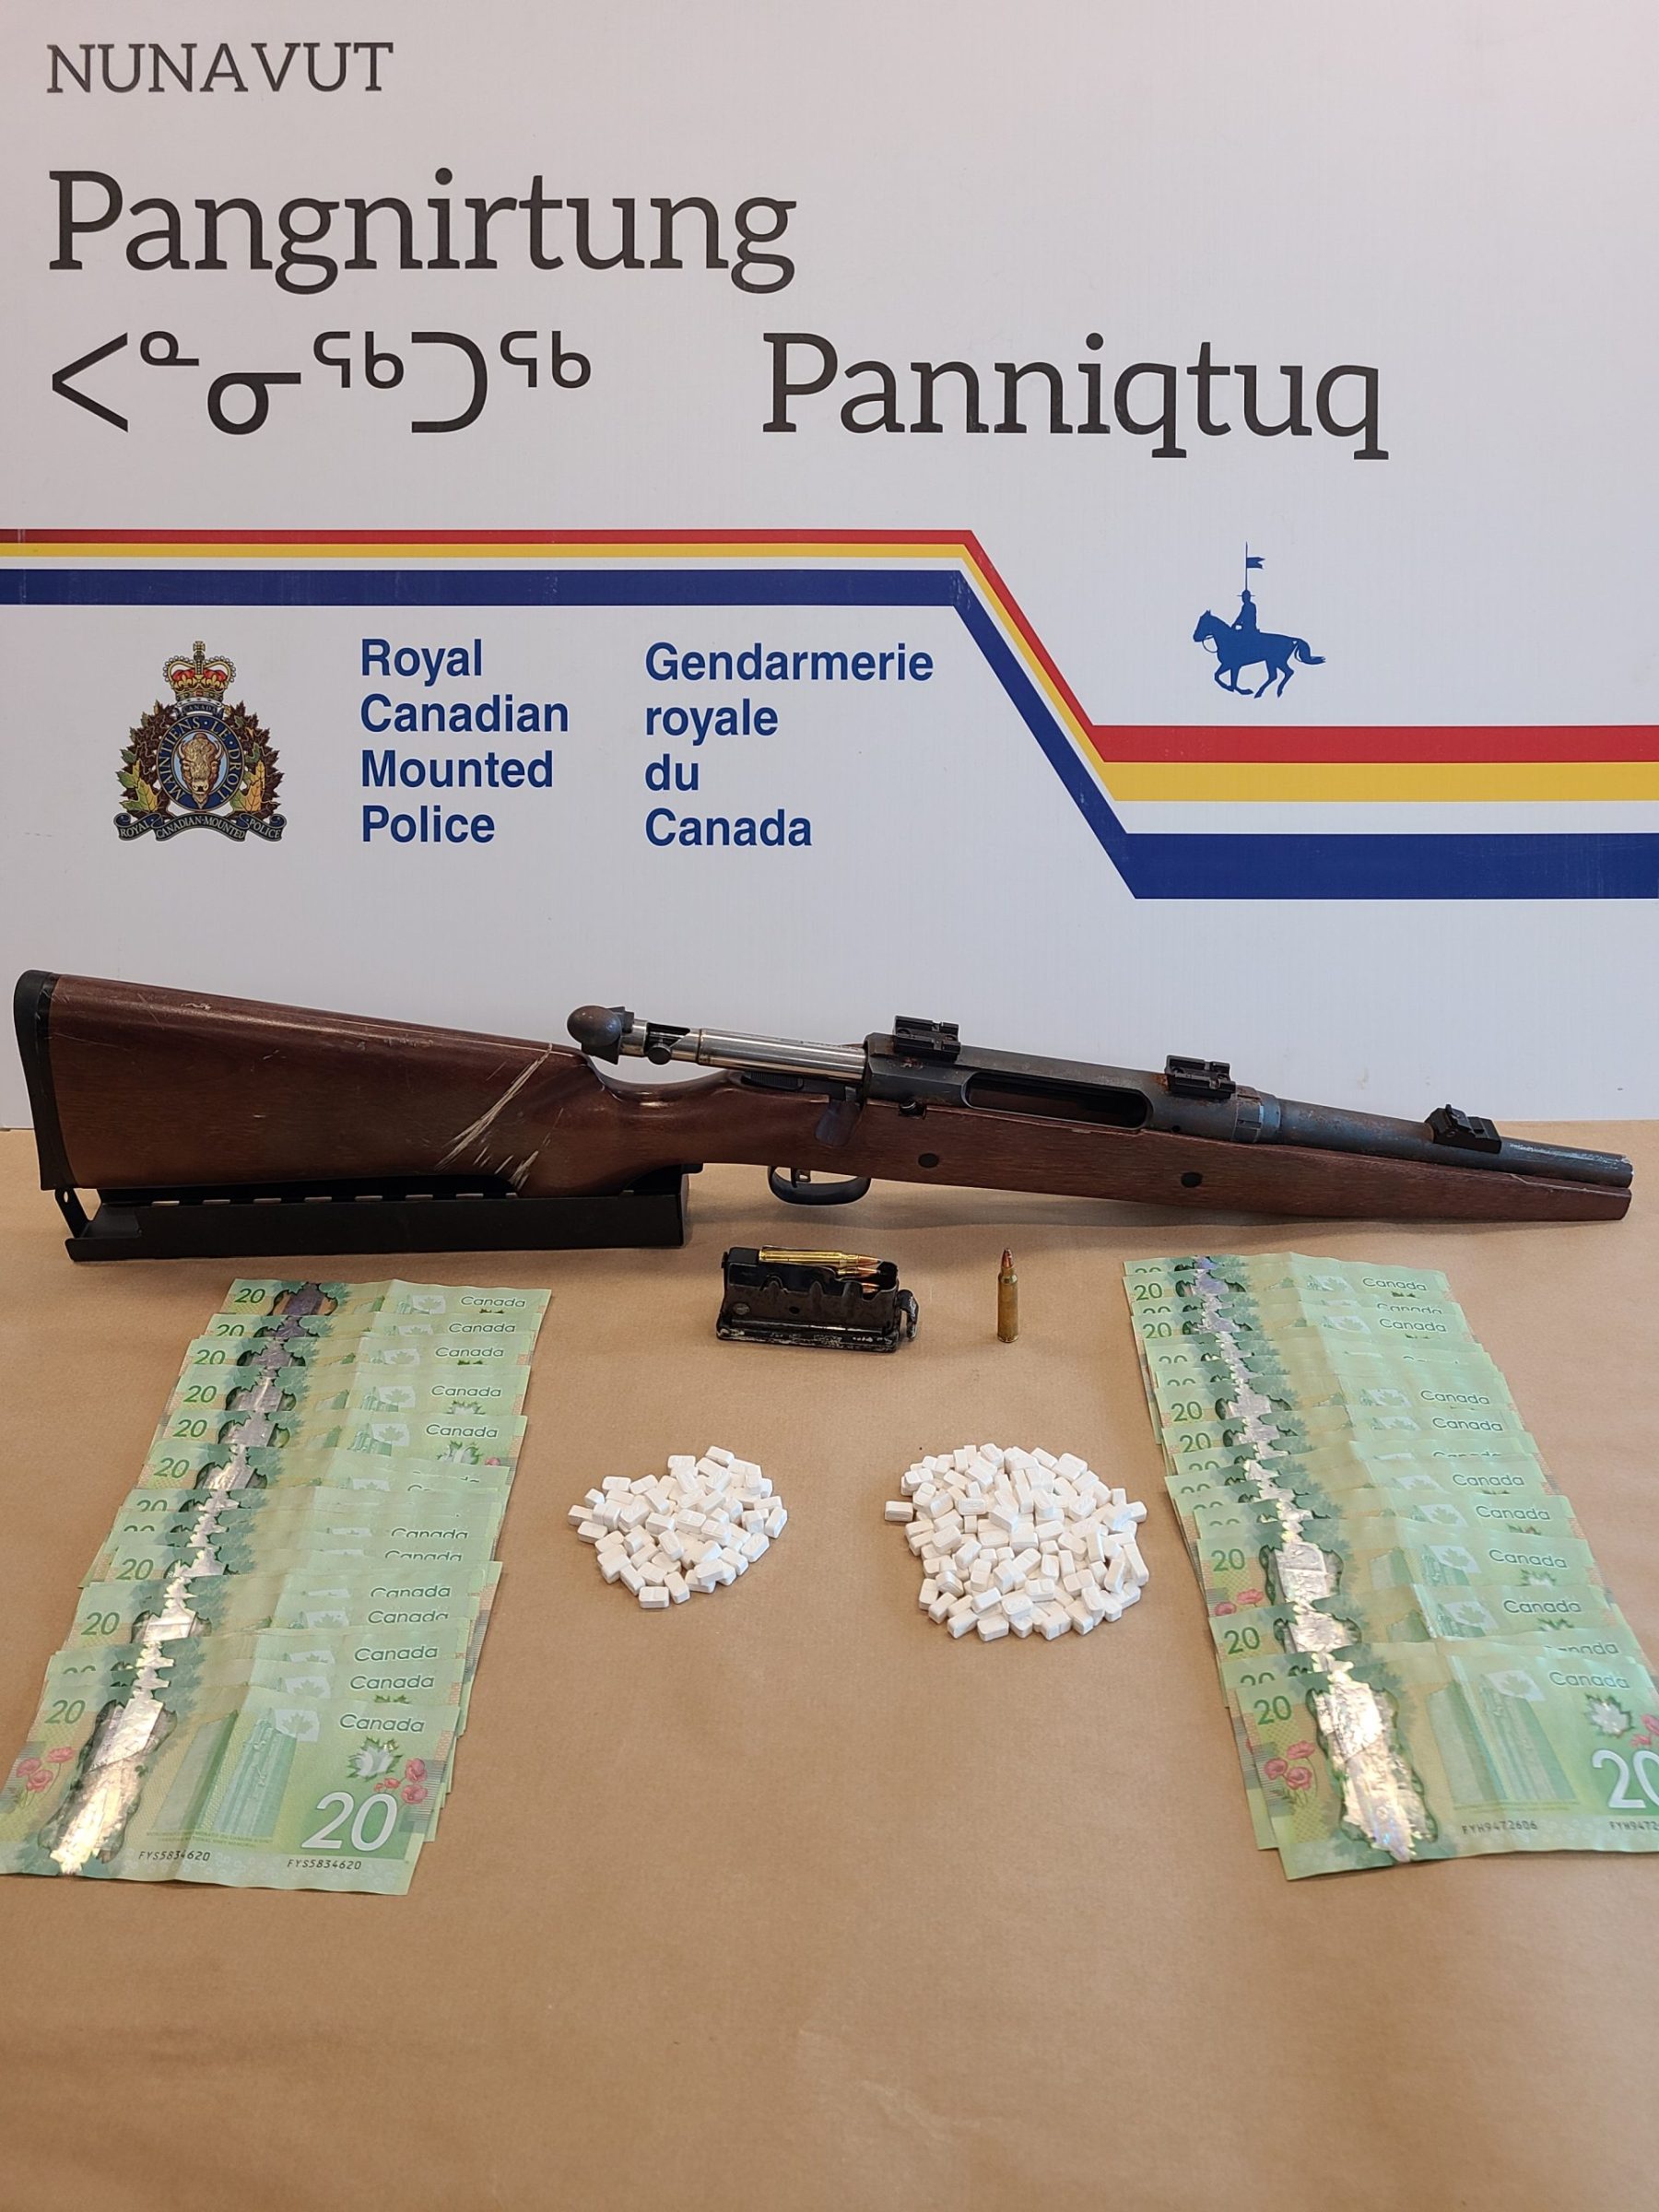 During a search in Pangnirtung last week police officers officers seized 100 grams of methamphetamine, a shotgun and money, according to an RCMP news release. (Photo courtesy of RCMP)